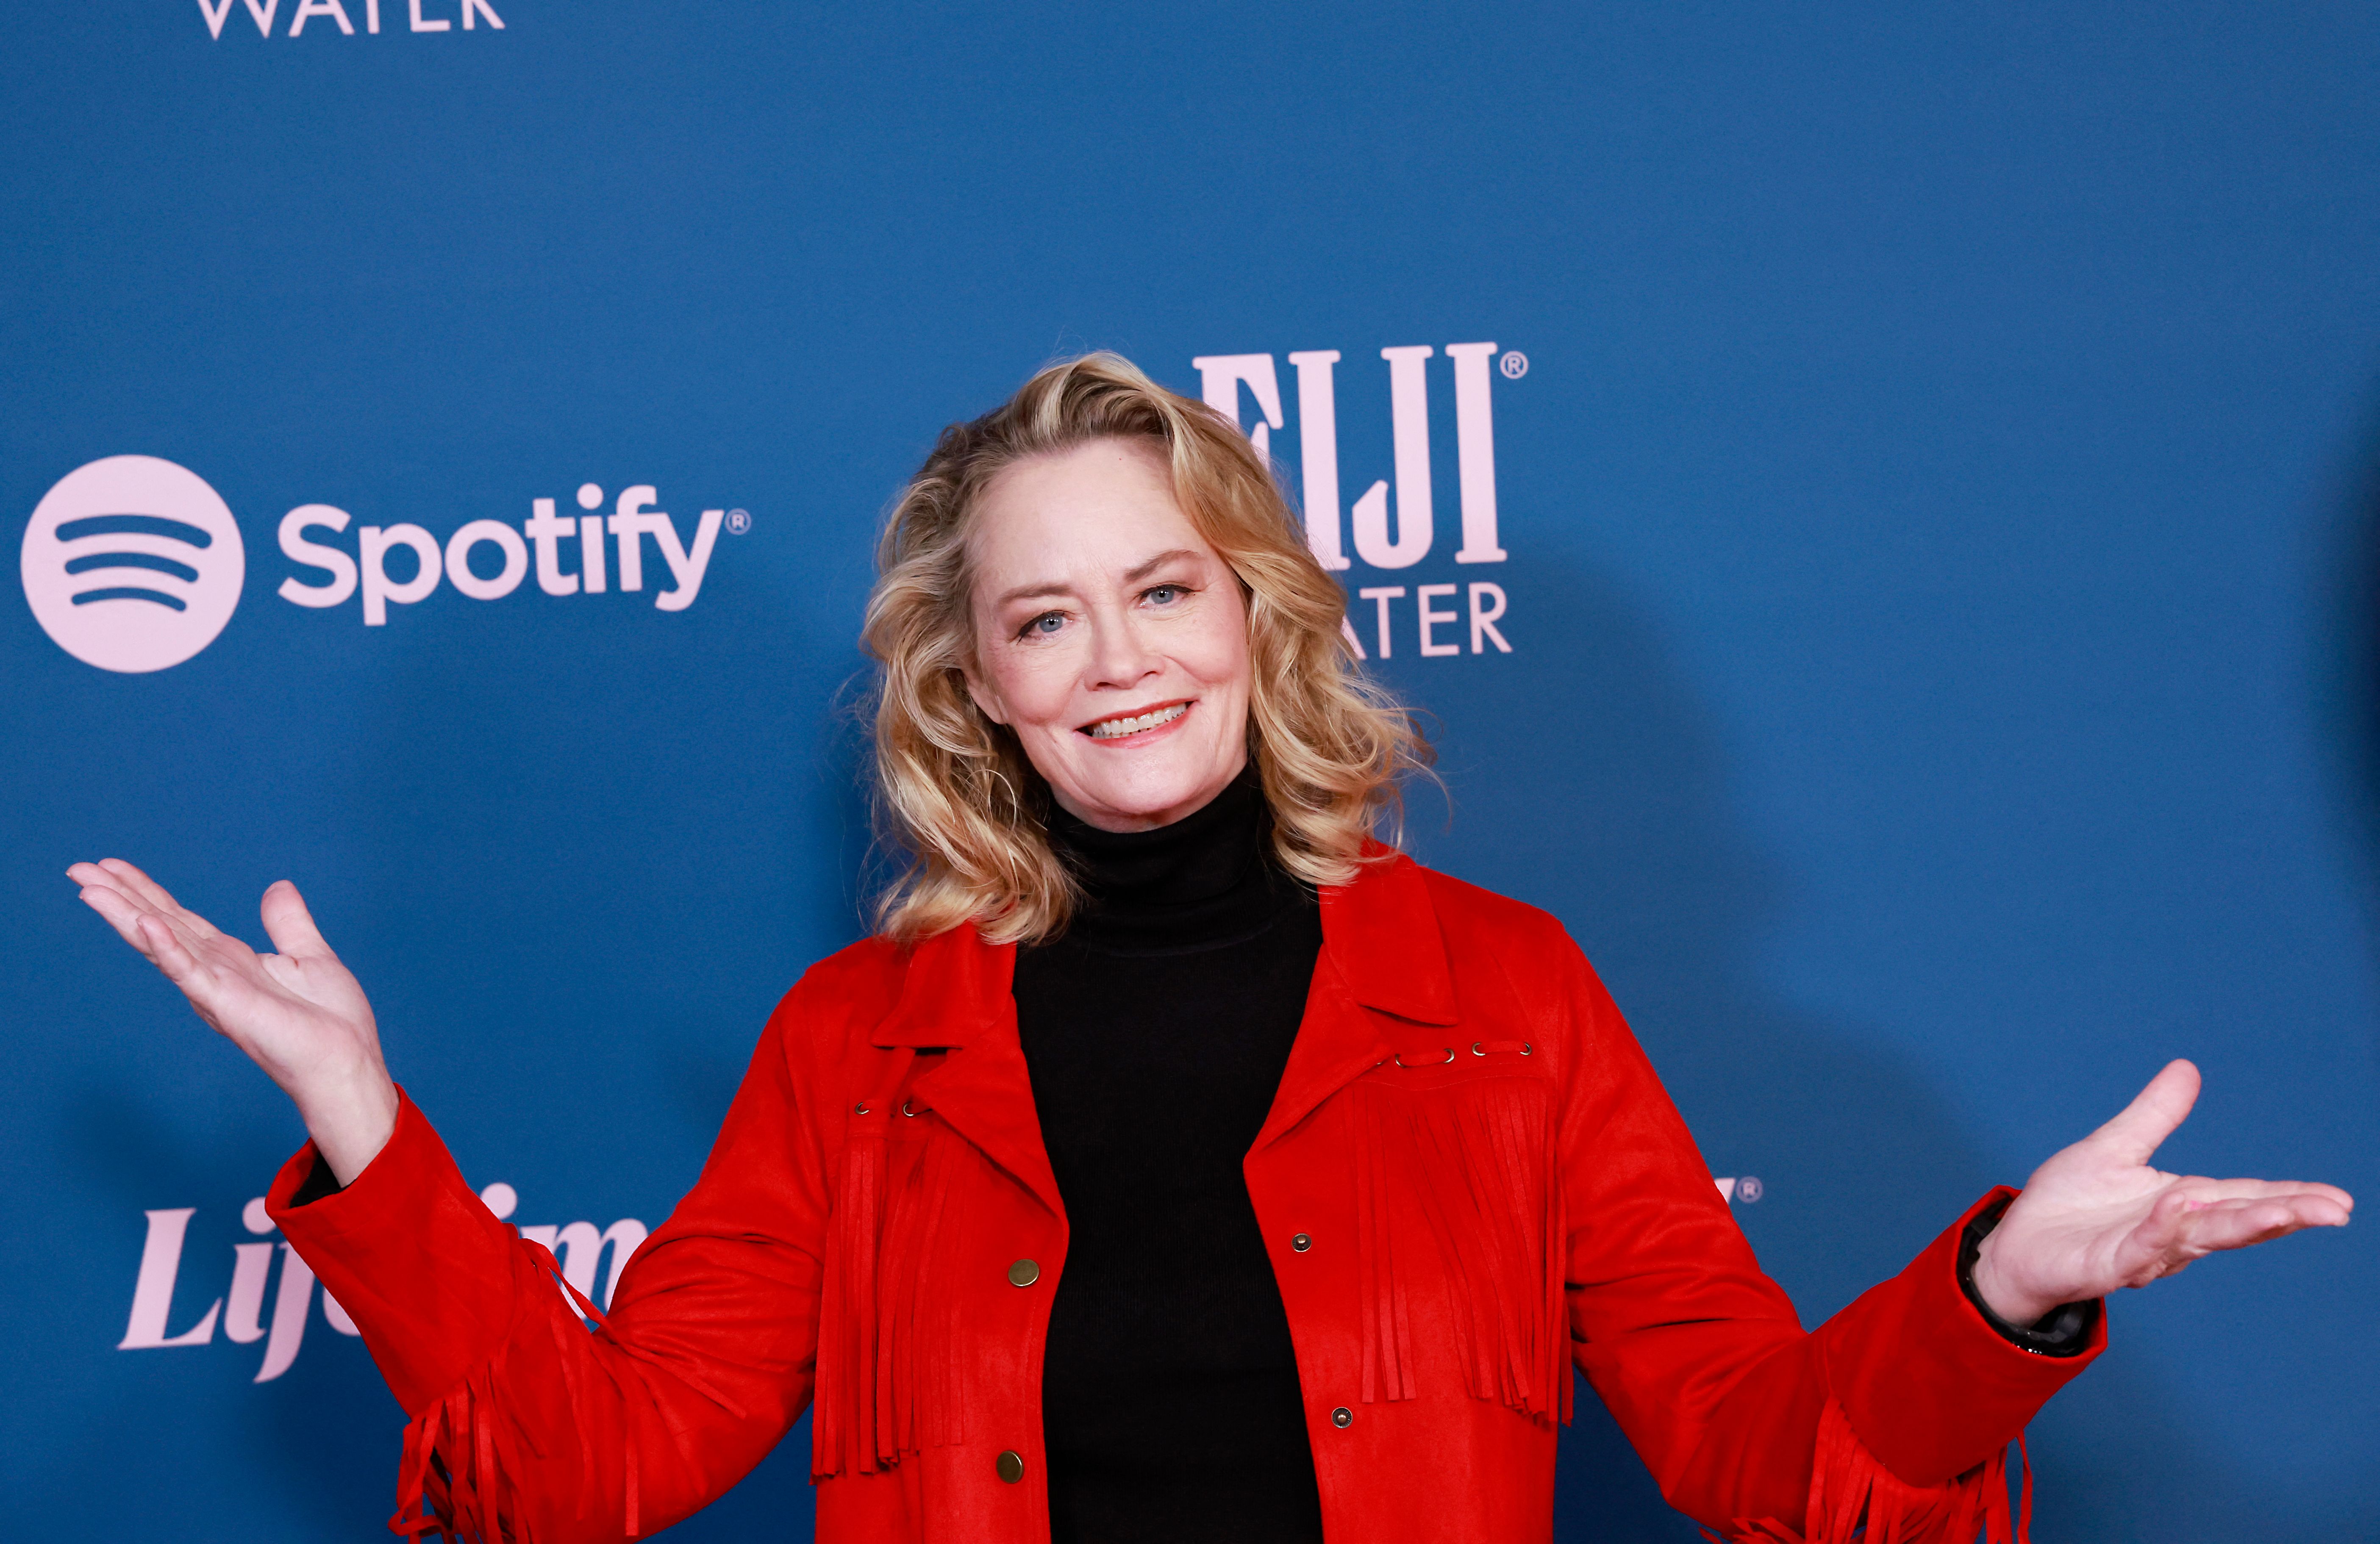 Cybill Shepherd arrives for The Hollywood Reporter's Women in Entertainment Gala at the Fairmont Hotel on December 7, 2022, in Los Angeles, California. | Source: Getty Images